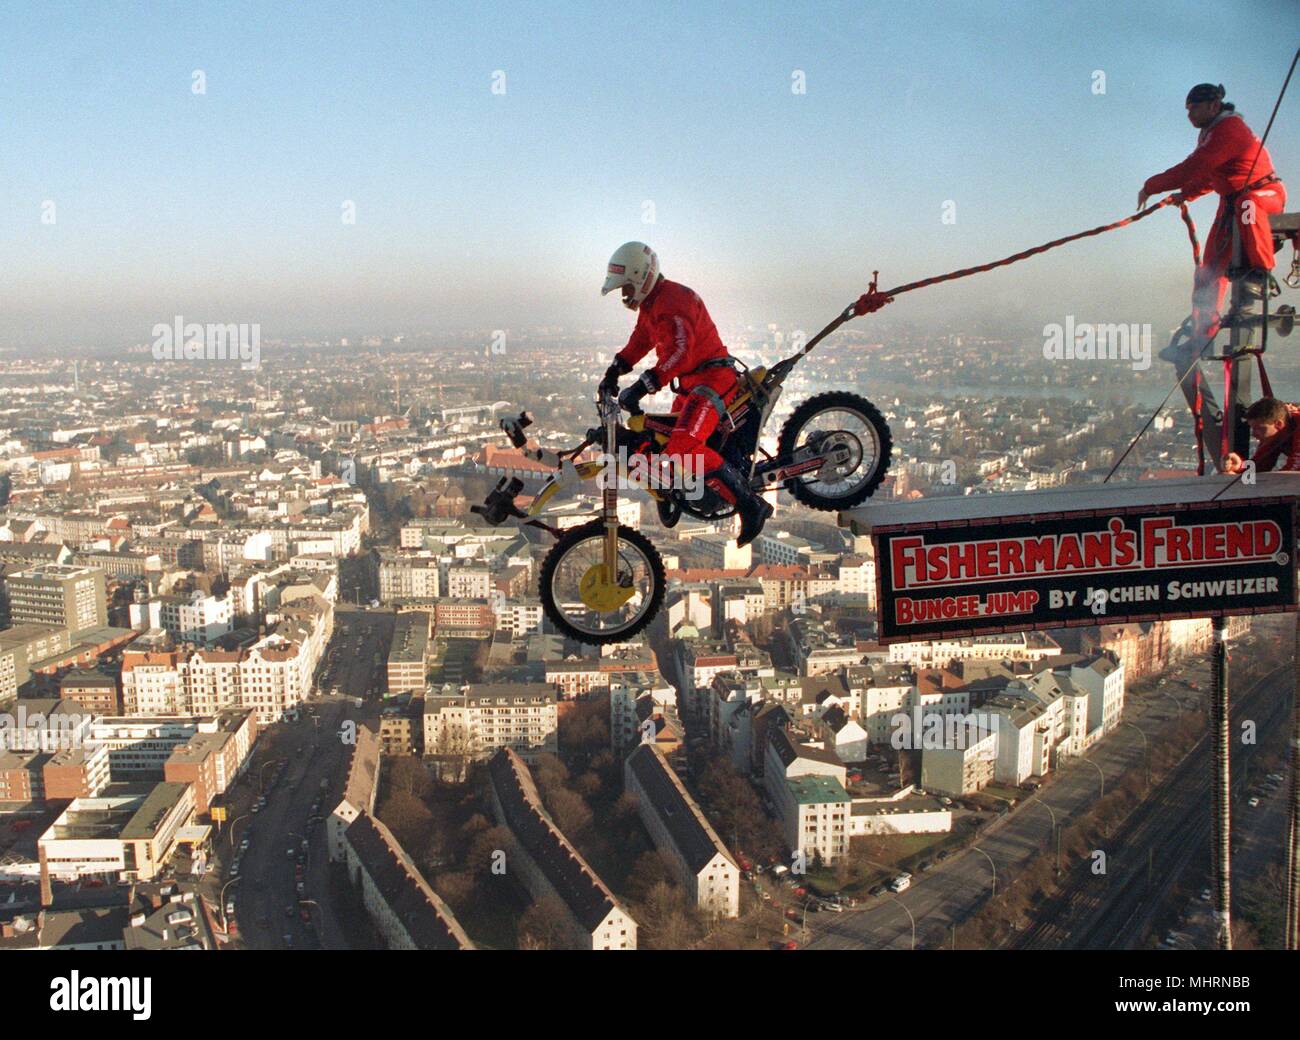 From 130 meters high Jochen Schweitzer jumps on his cross machine, hanging on a bungee rope only, on 15.1.1997 from the Hamburg TV tower. The hitherto unique stunt on a 100 kilogram motorcycle is to be advertised for the Hamburg Motorcycle Days, which take place from 24 to 26 January at the exhibition center. | usage worldwide Stock Photo